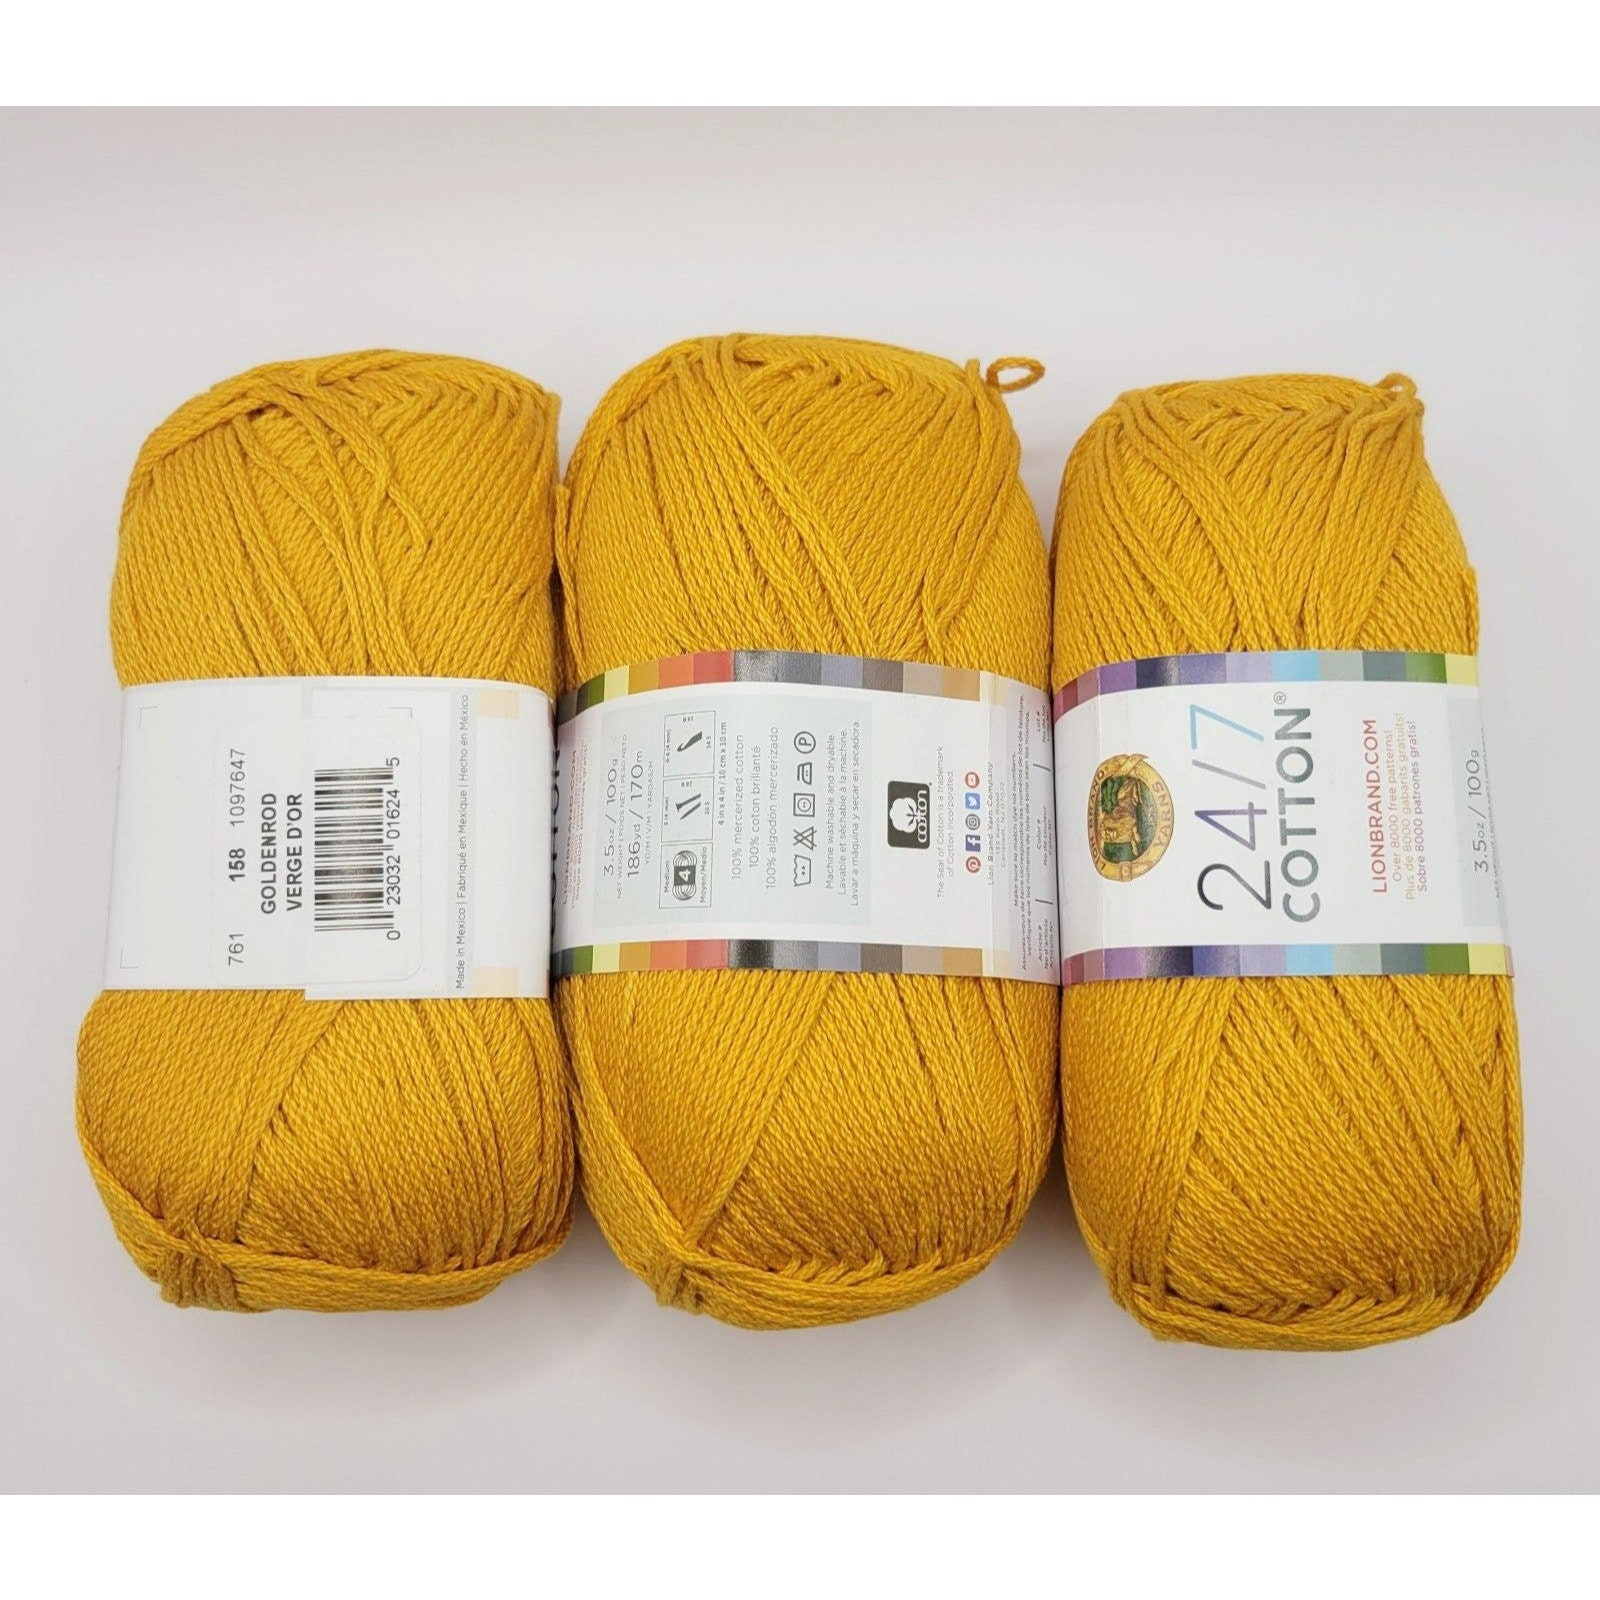 Lion Brand 24/7 Cotton Yarn, Yarn for Knitting, Crocheting, and Crafts,  Goldenrod, 3 Pack